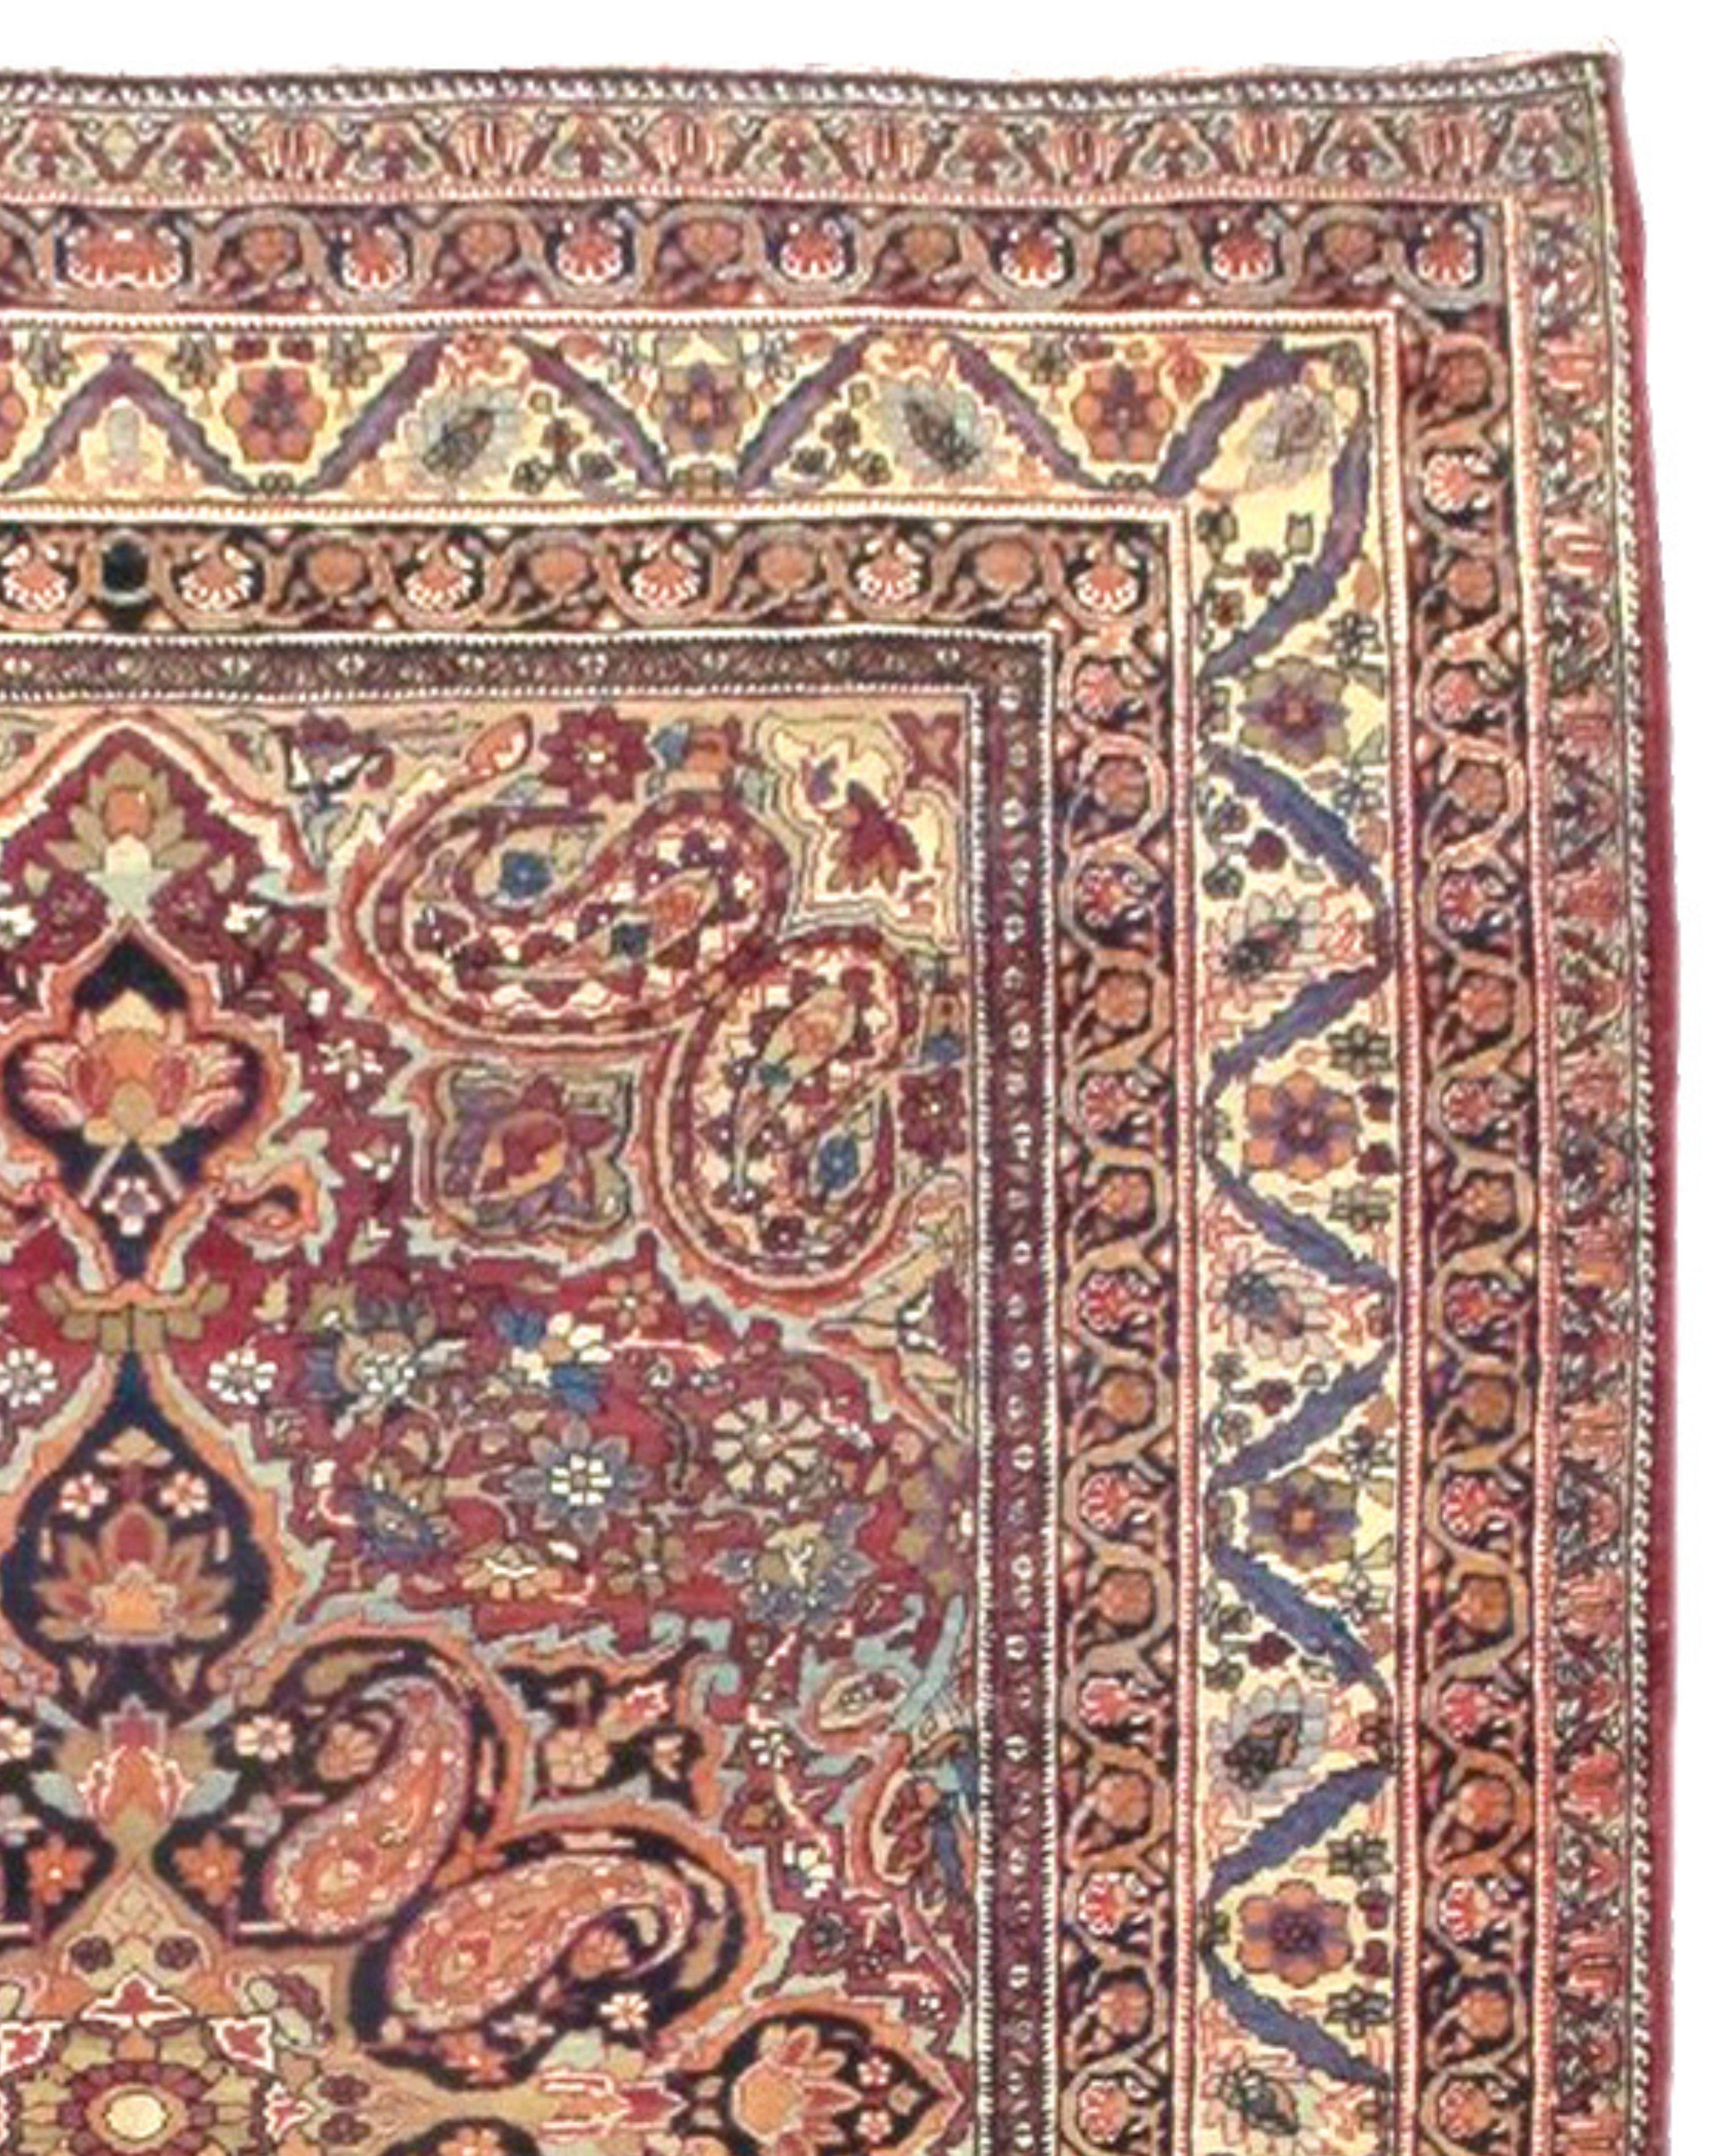 Antique Persian Kirman Rug, Late 19th Century

During the 19th century, the city of Kirman in southeast Persia was closer to what was then British India than to the Persian capital of Tehran. Both rugs and textiles were woven in Kirman reflecting a